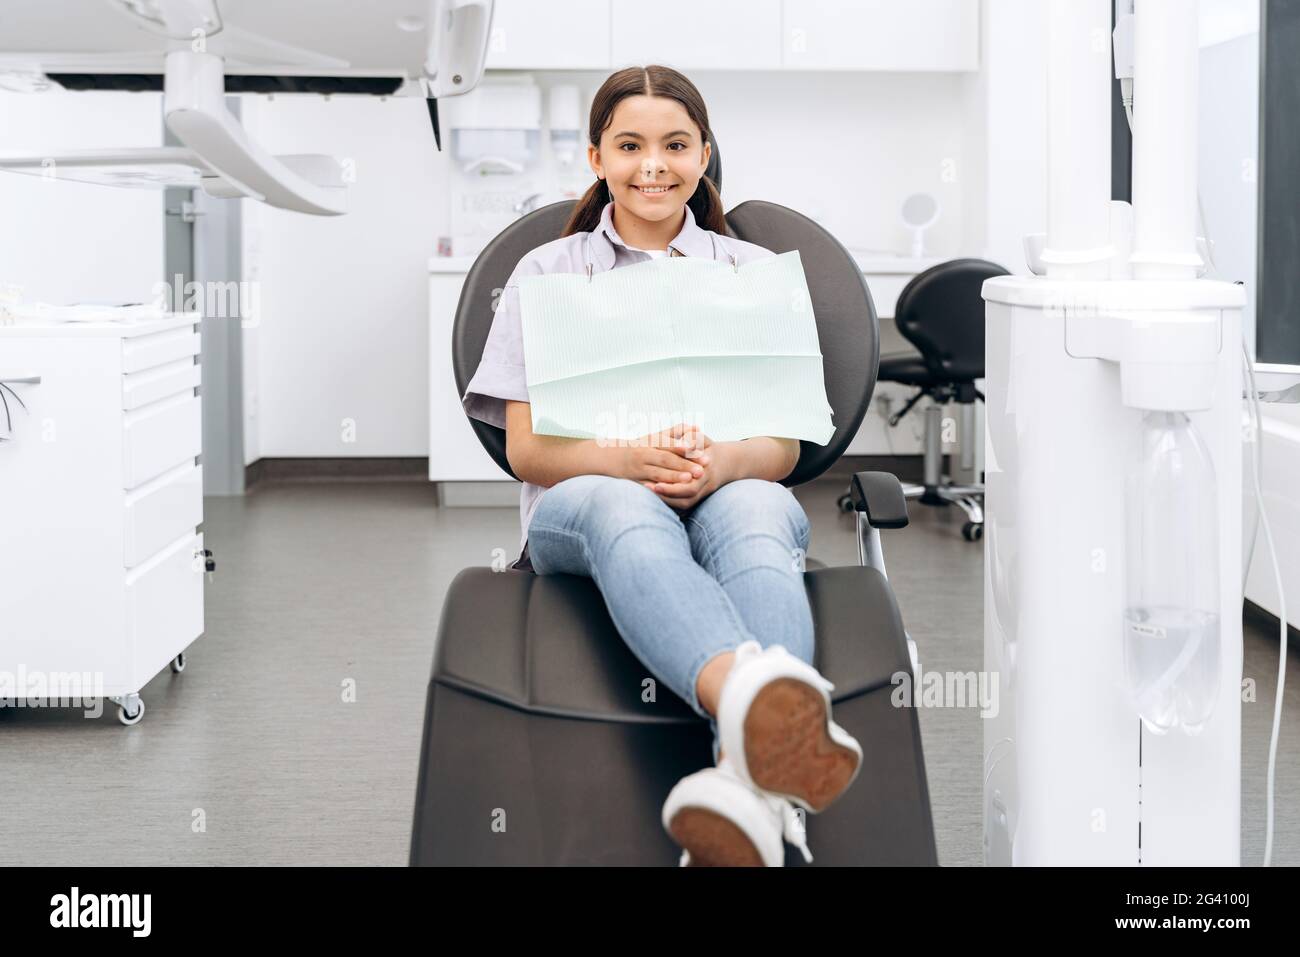 Pleasant, young patient is waiting for a doctor in a dental chair. Cute, young patient smiling. Stock Photo